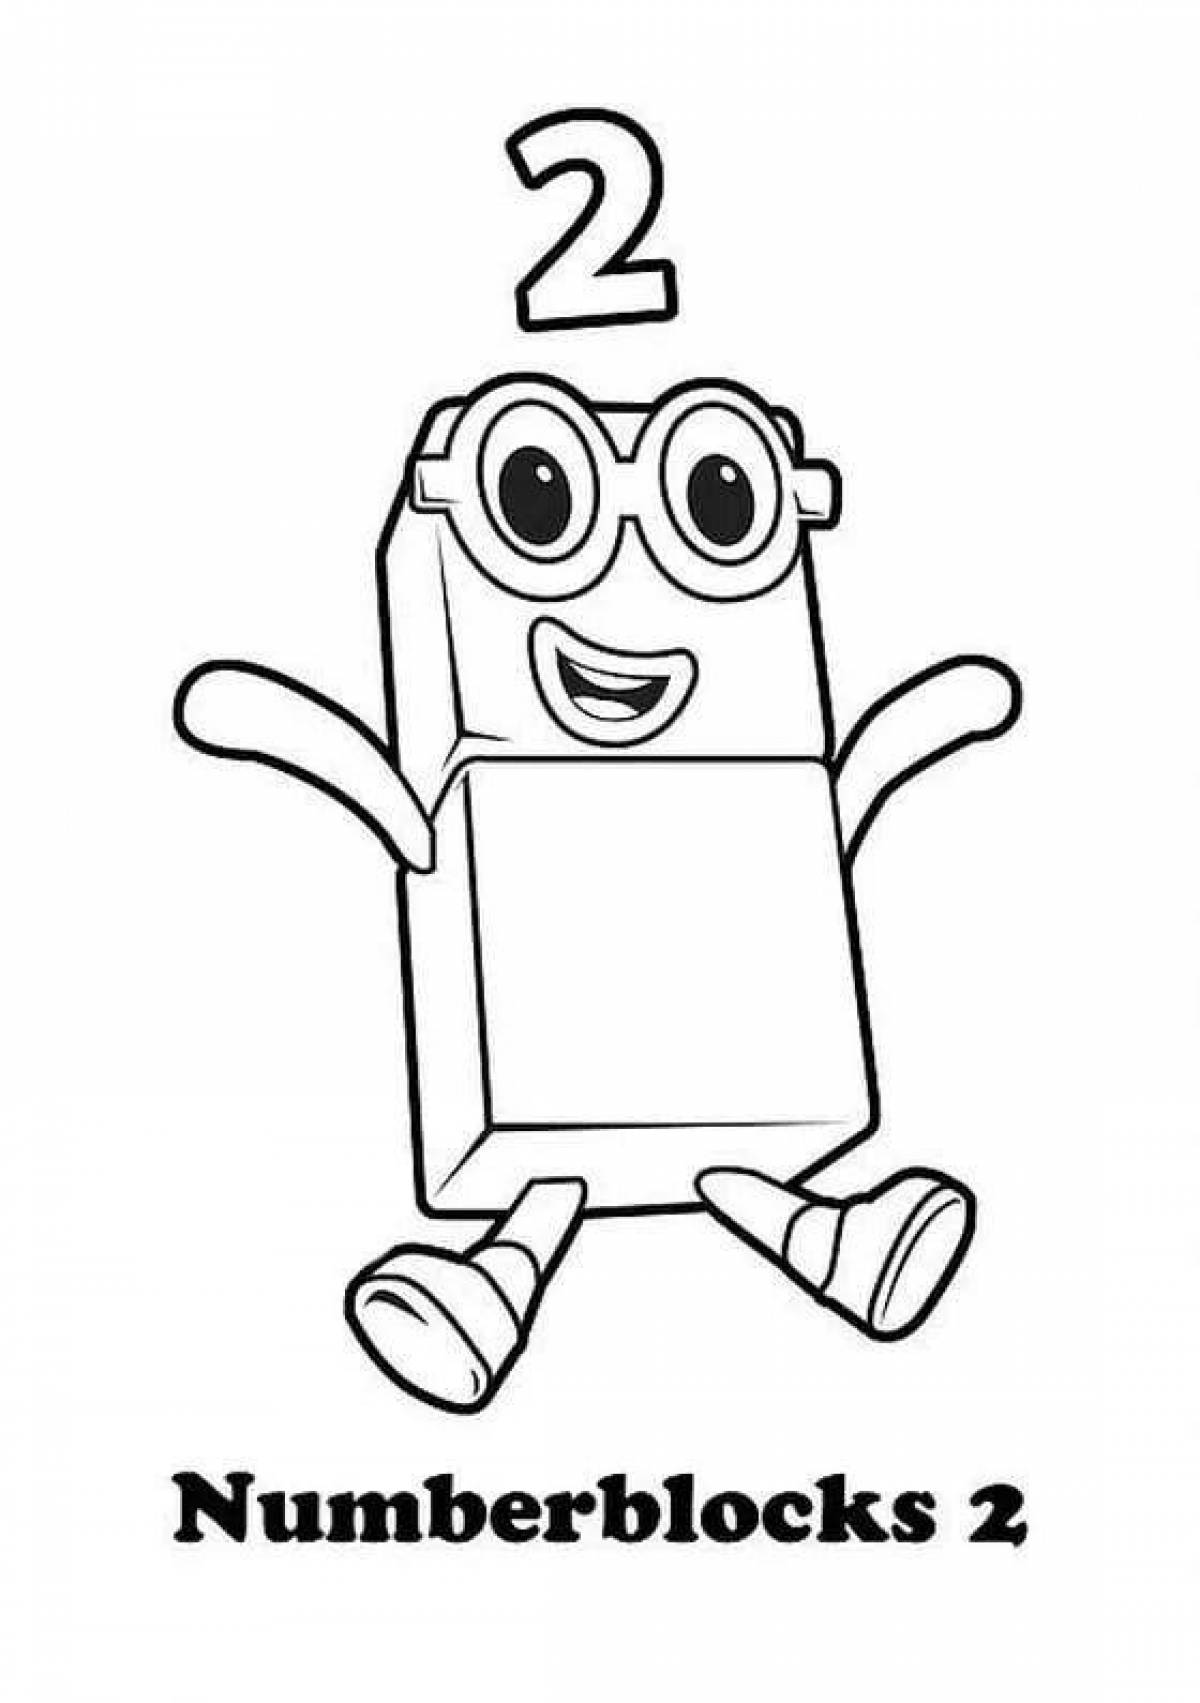 Coloring page for funny digital blocks